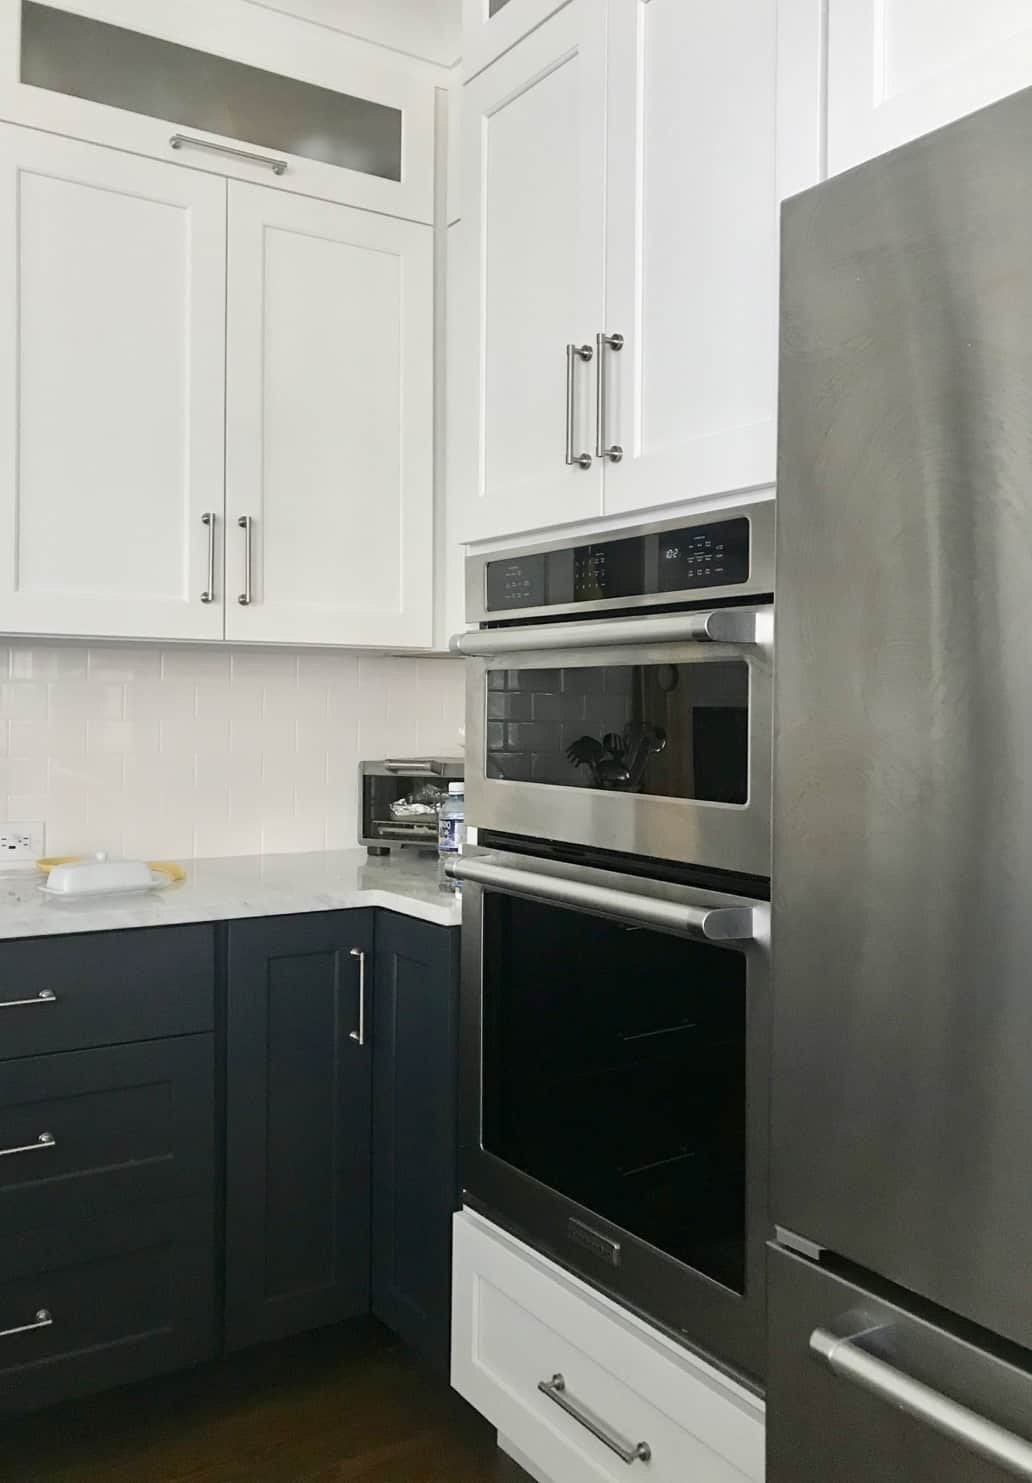 Stainless refrigerator and oven/microwave combo in a classic kitchen